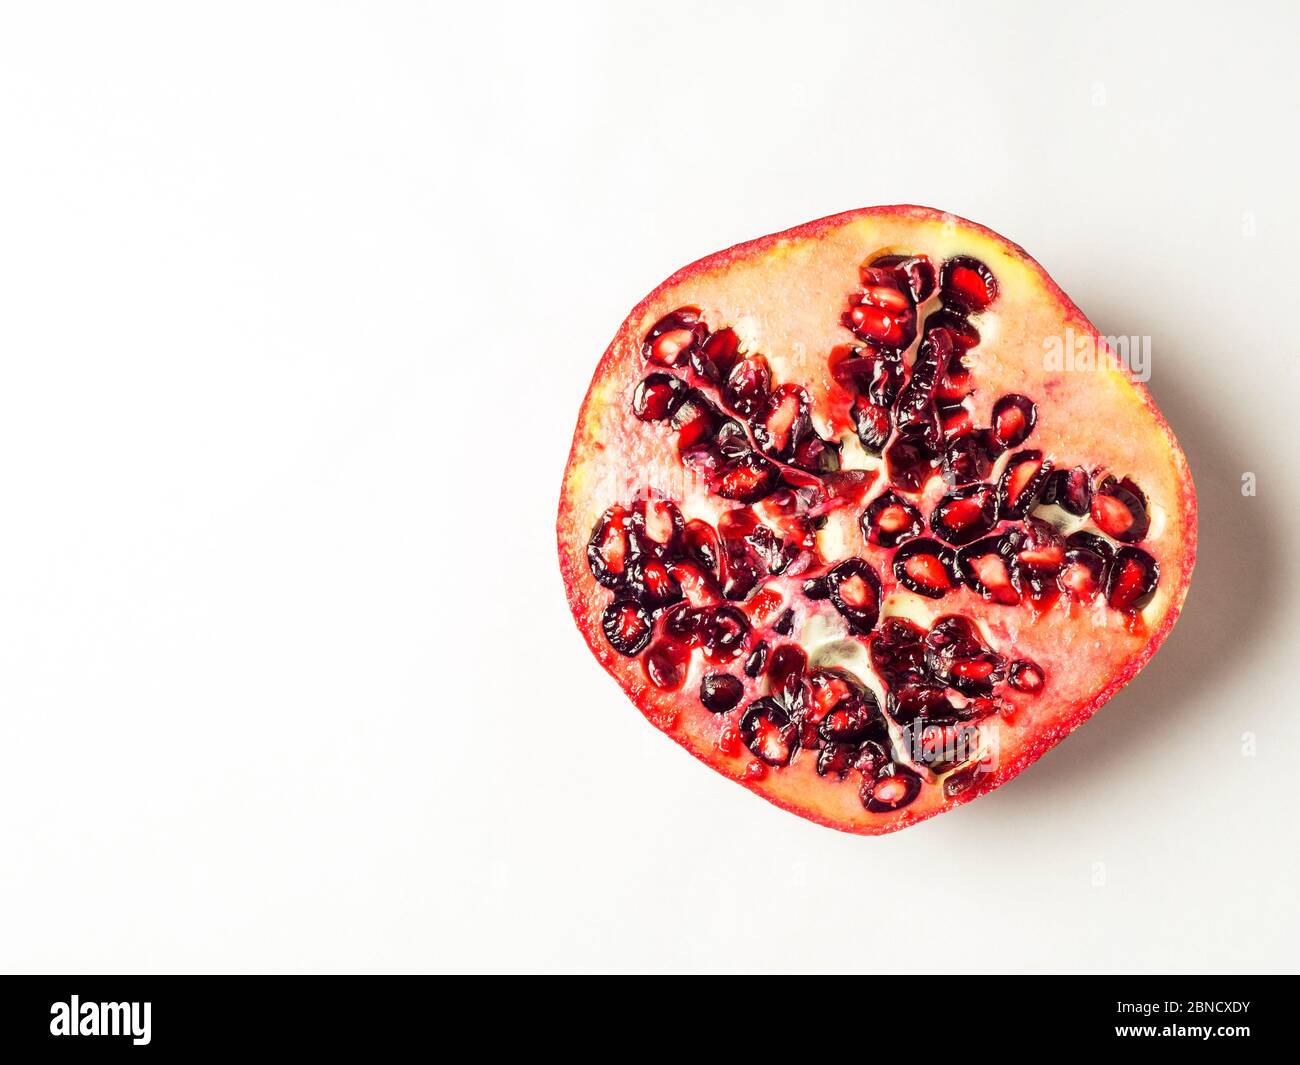 Half a fresh pomegranate on a white background with copy space Stock Photo